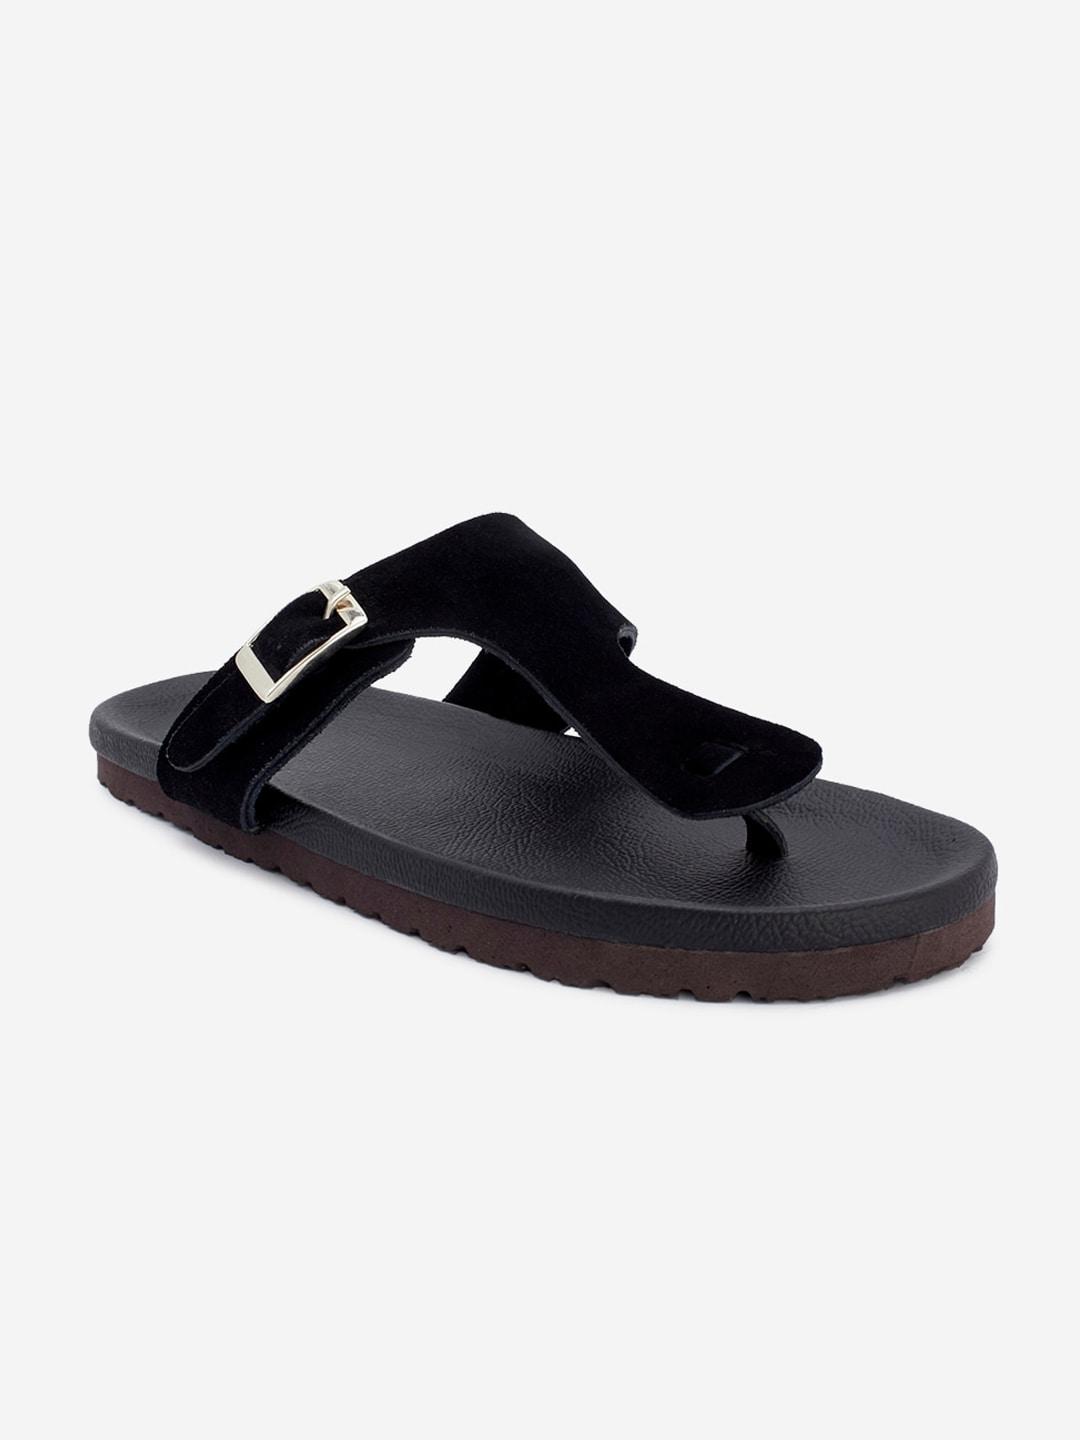 the madras trunk men black t-strap flats with buckles